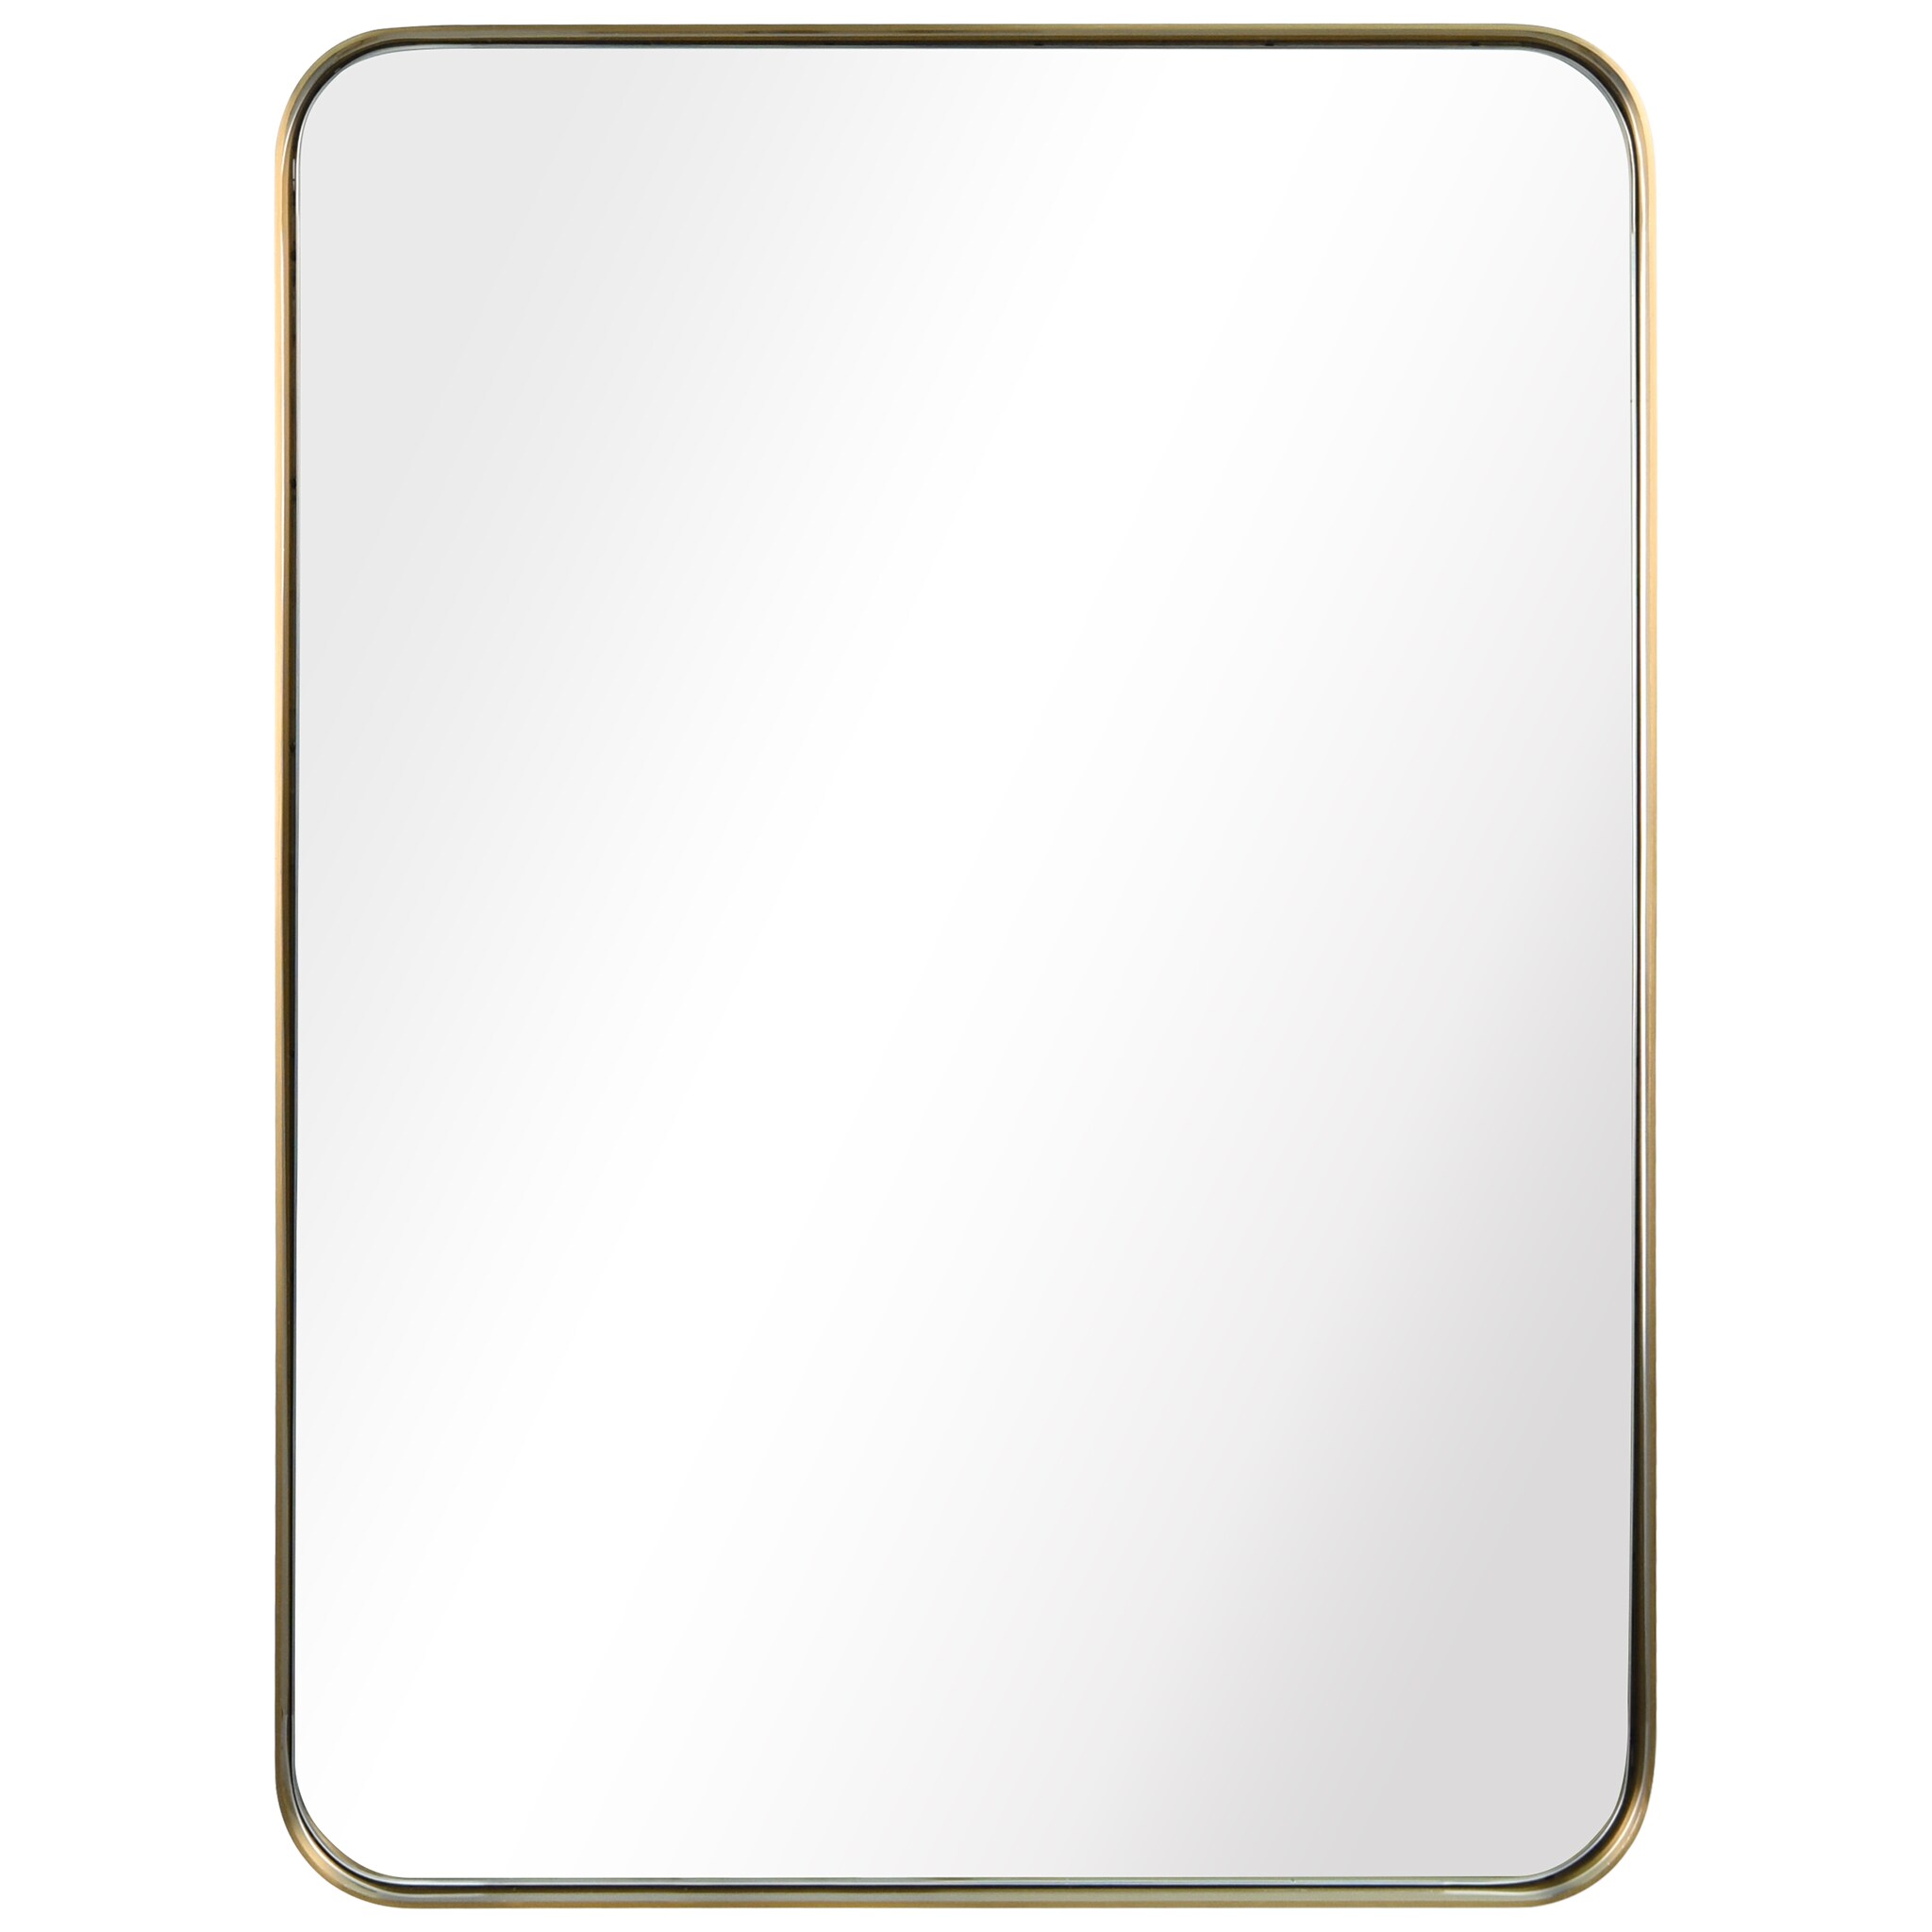 30x30 Snap Frames Online, Huge Stocks, Low Prices, Six Year Warranty - Snap  Frames Direct